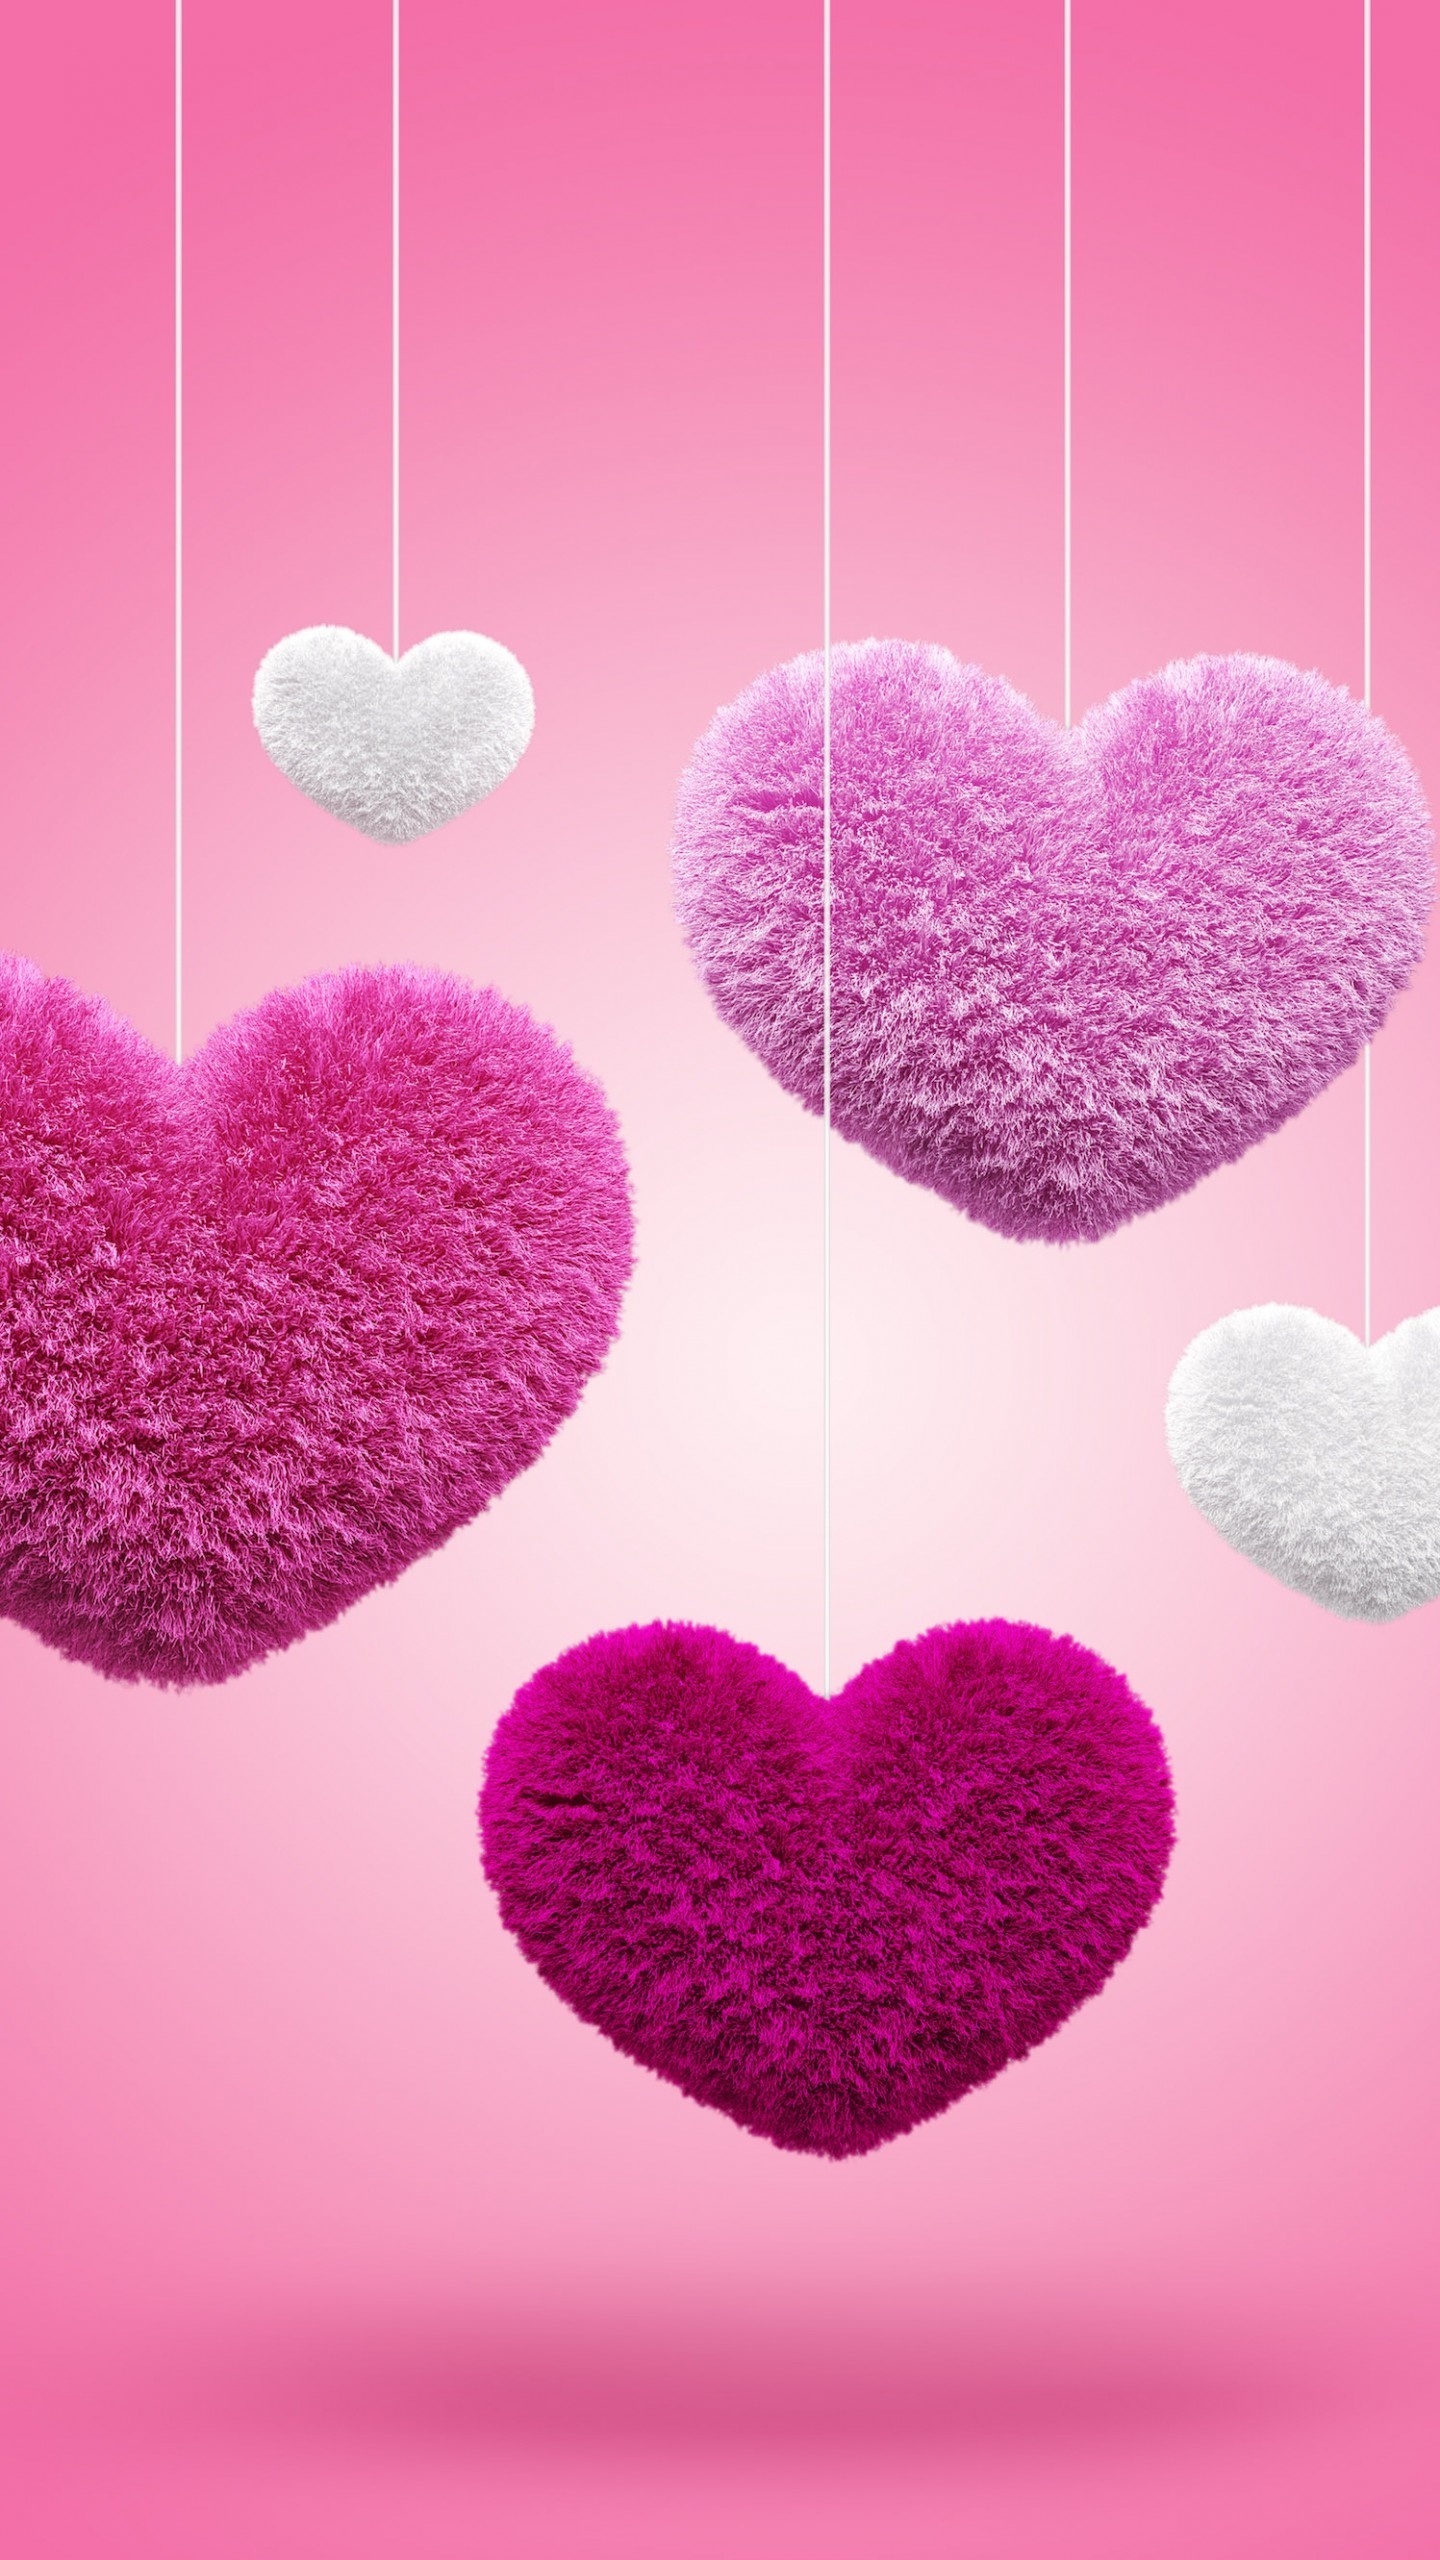 1440x2560, Red Love Hearts Wallpapers Mobile Quad Hd - Heart Theme Download  - 1440x2560 Wallpaper 